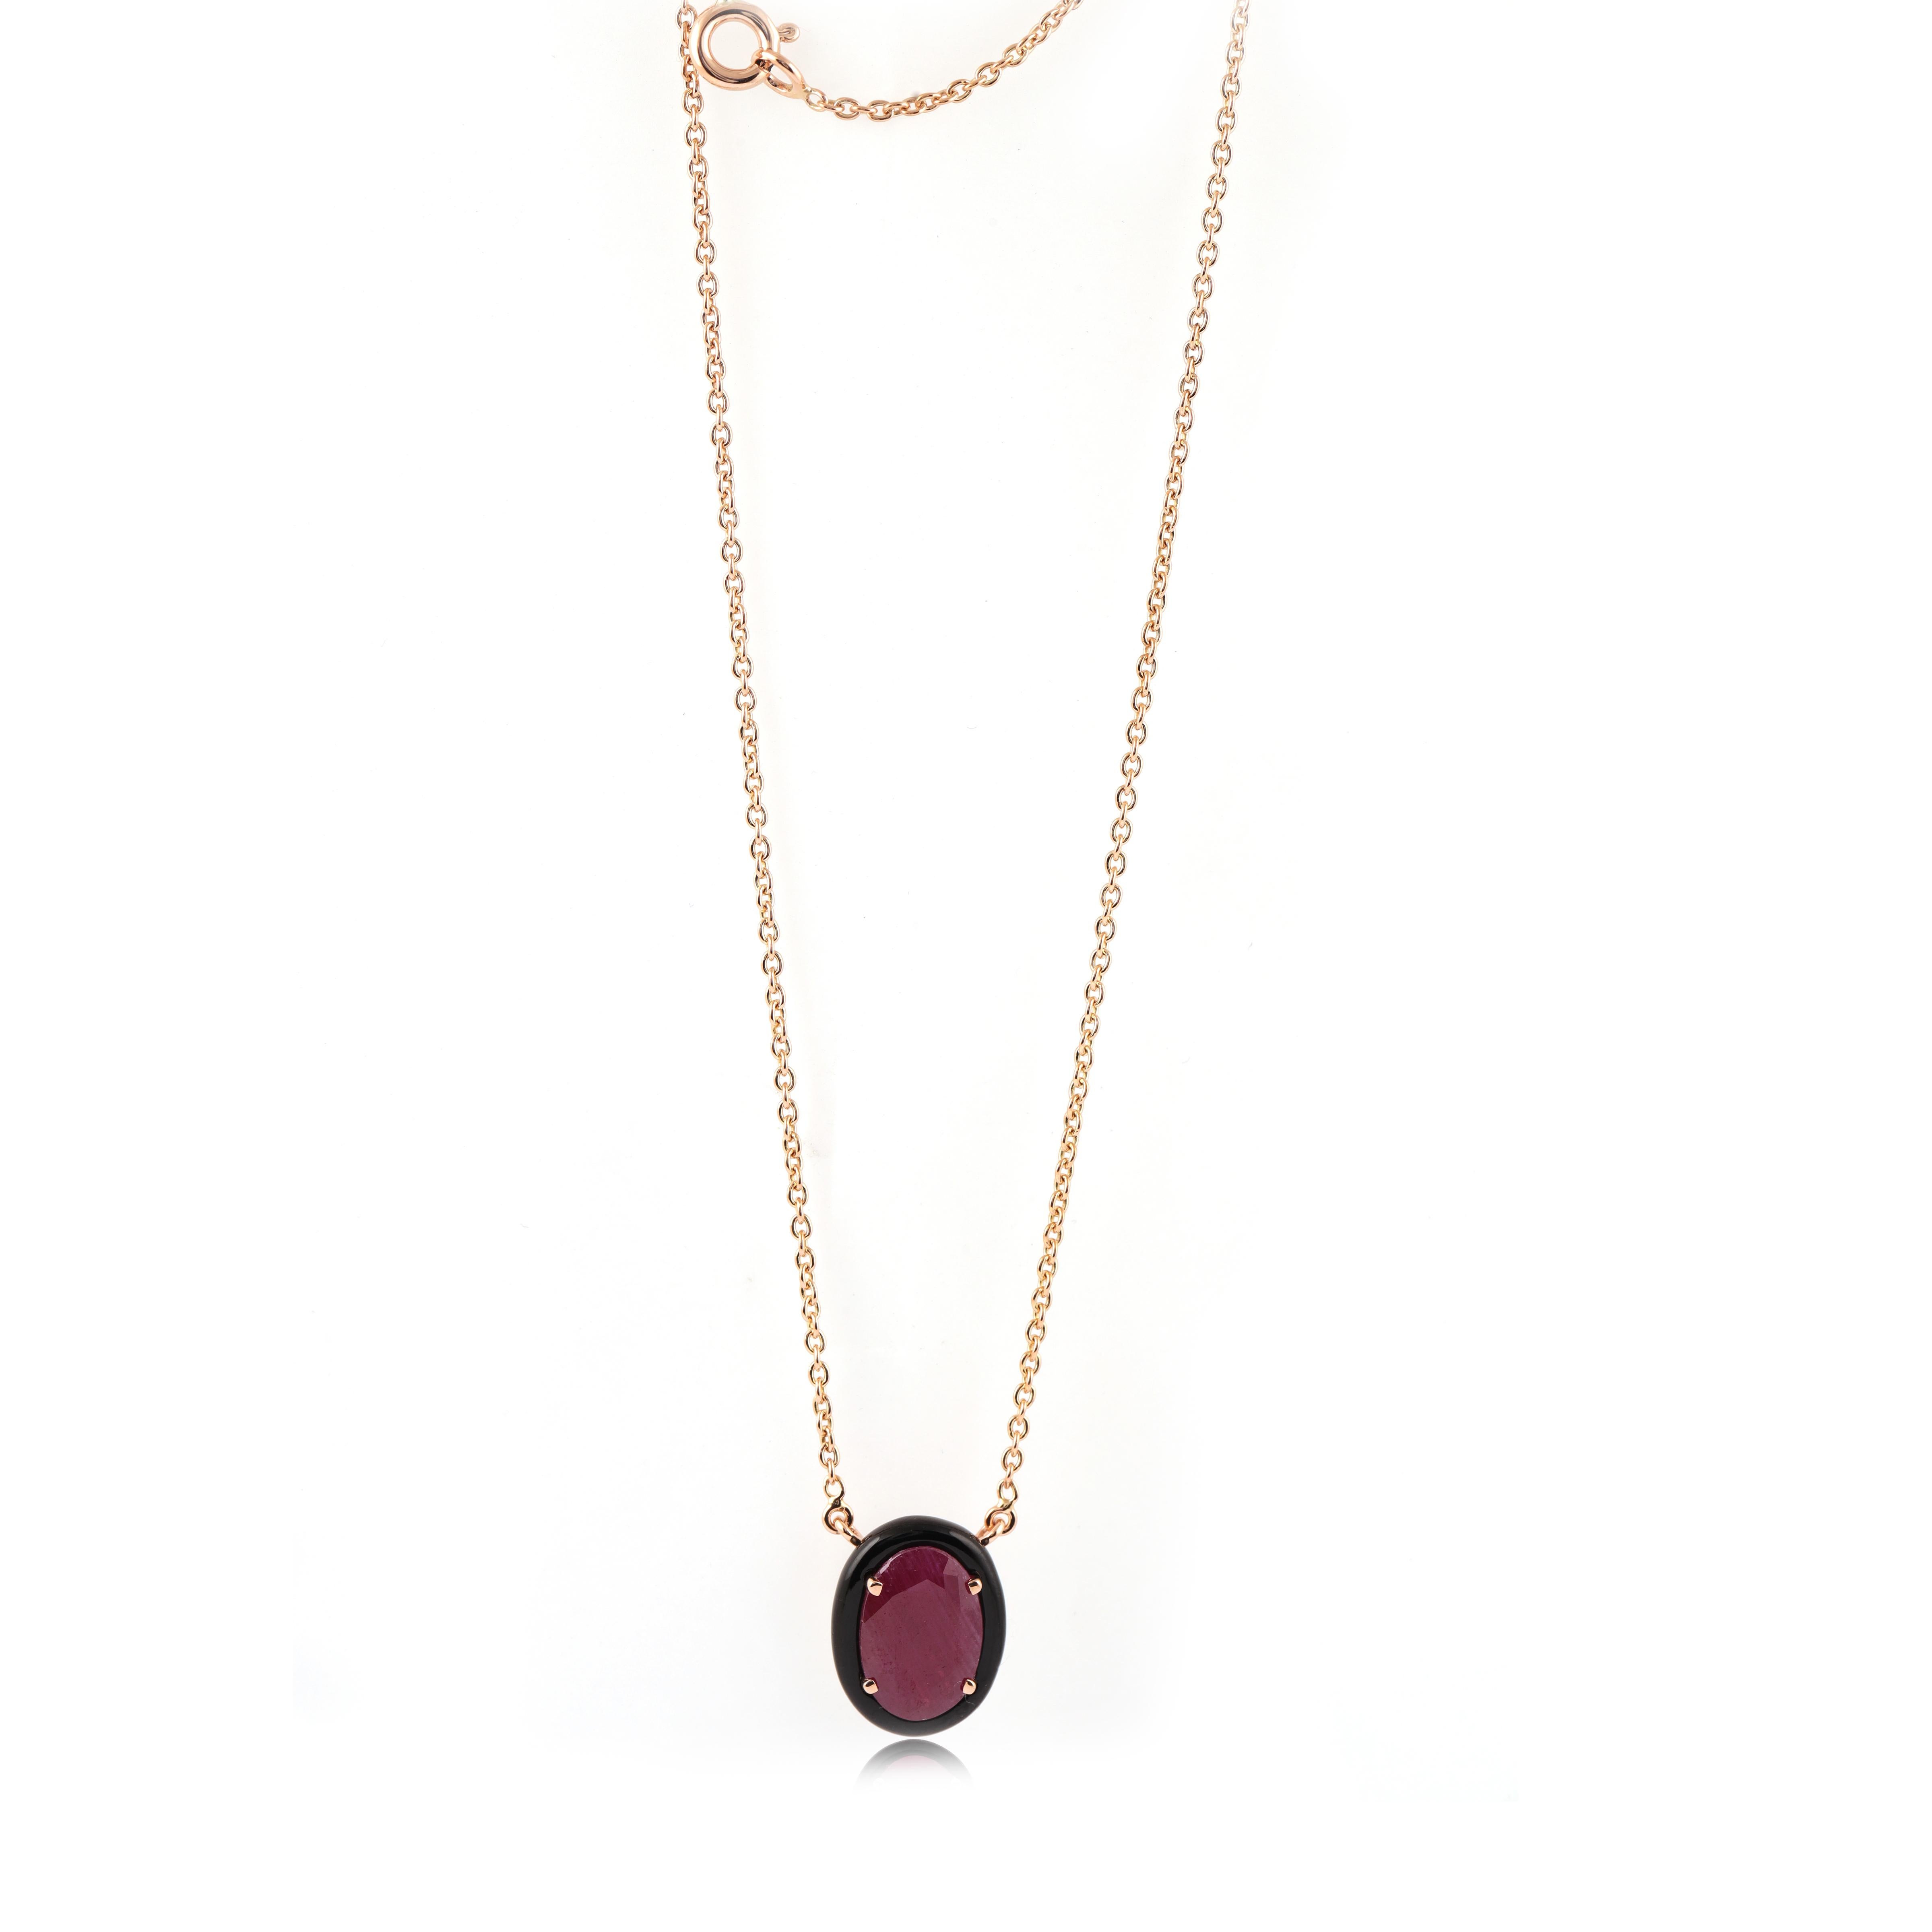 Magnificent Burma Ruby, Black onyx Pendant. 

Ruby: 3.92 carats
Black onyx - 1.64 carat
Rose Gold - 5.01 gm

Custom Services
Available in Different  gem stones 
Request Customization

